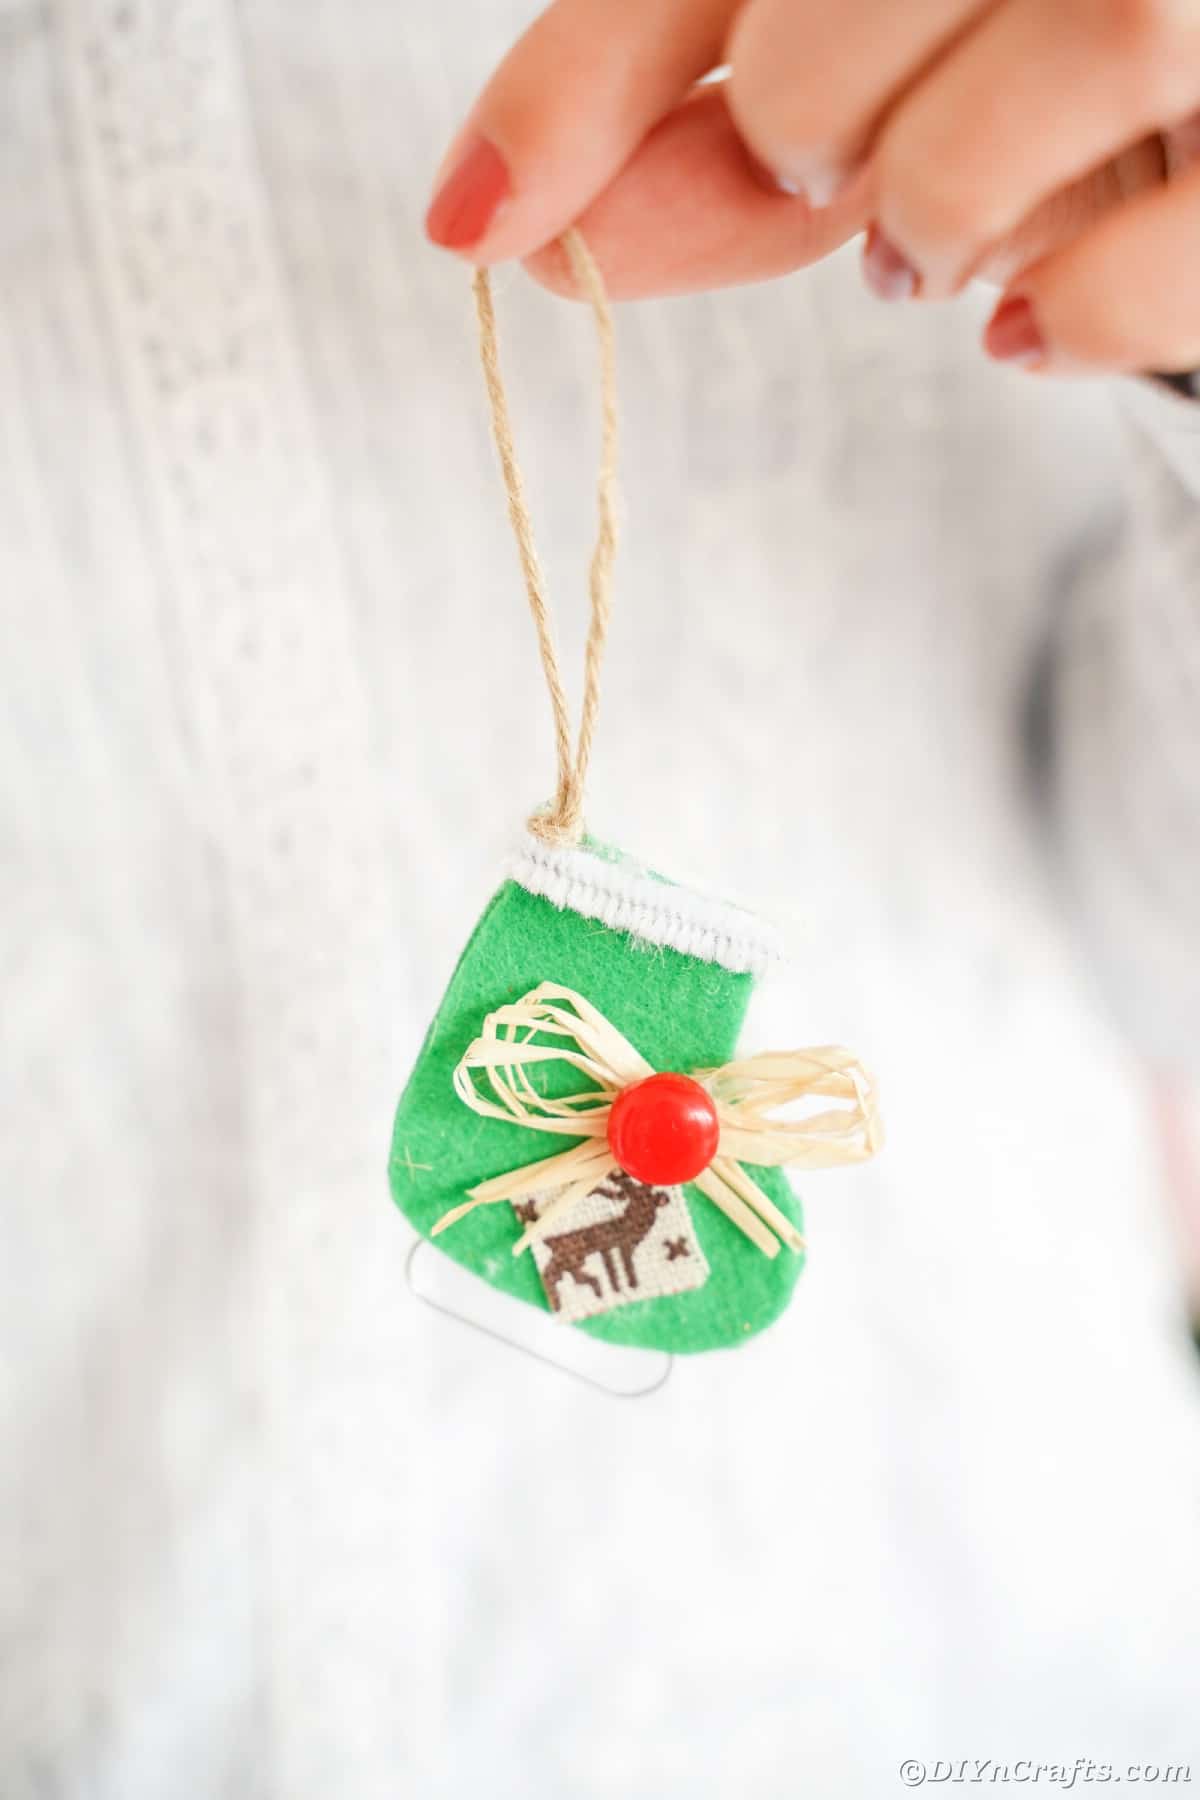 person in white sweater holding green ice skate ornament